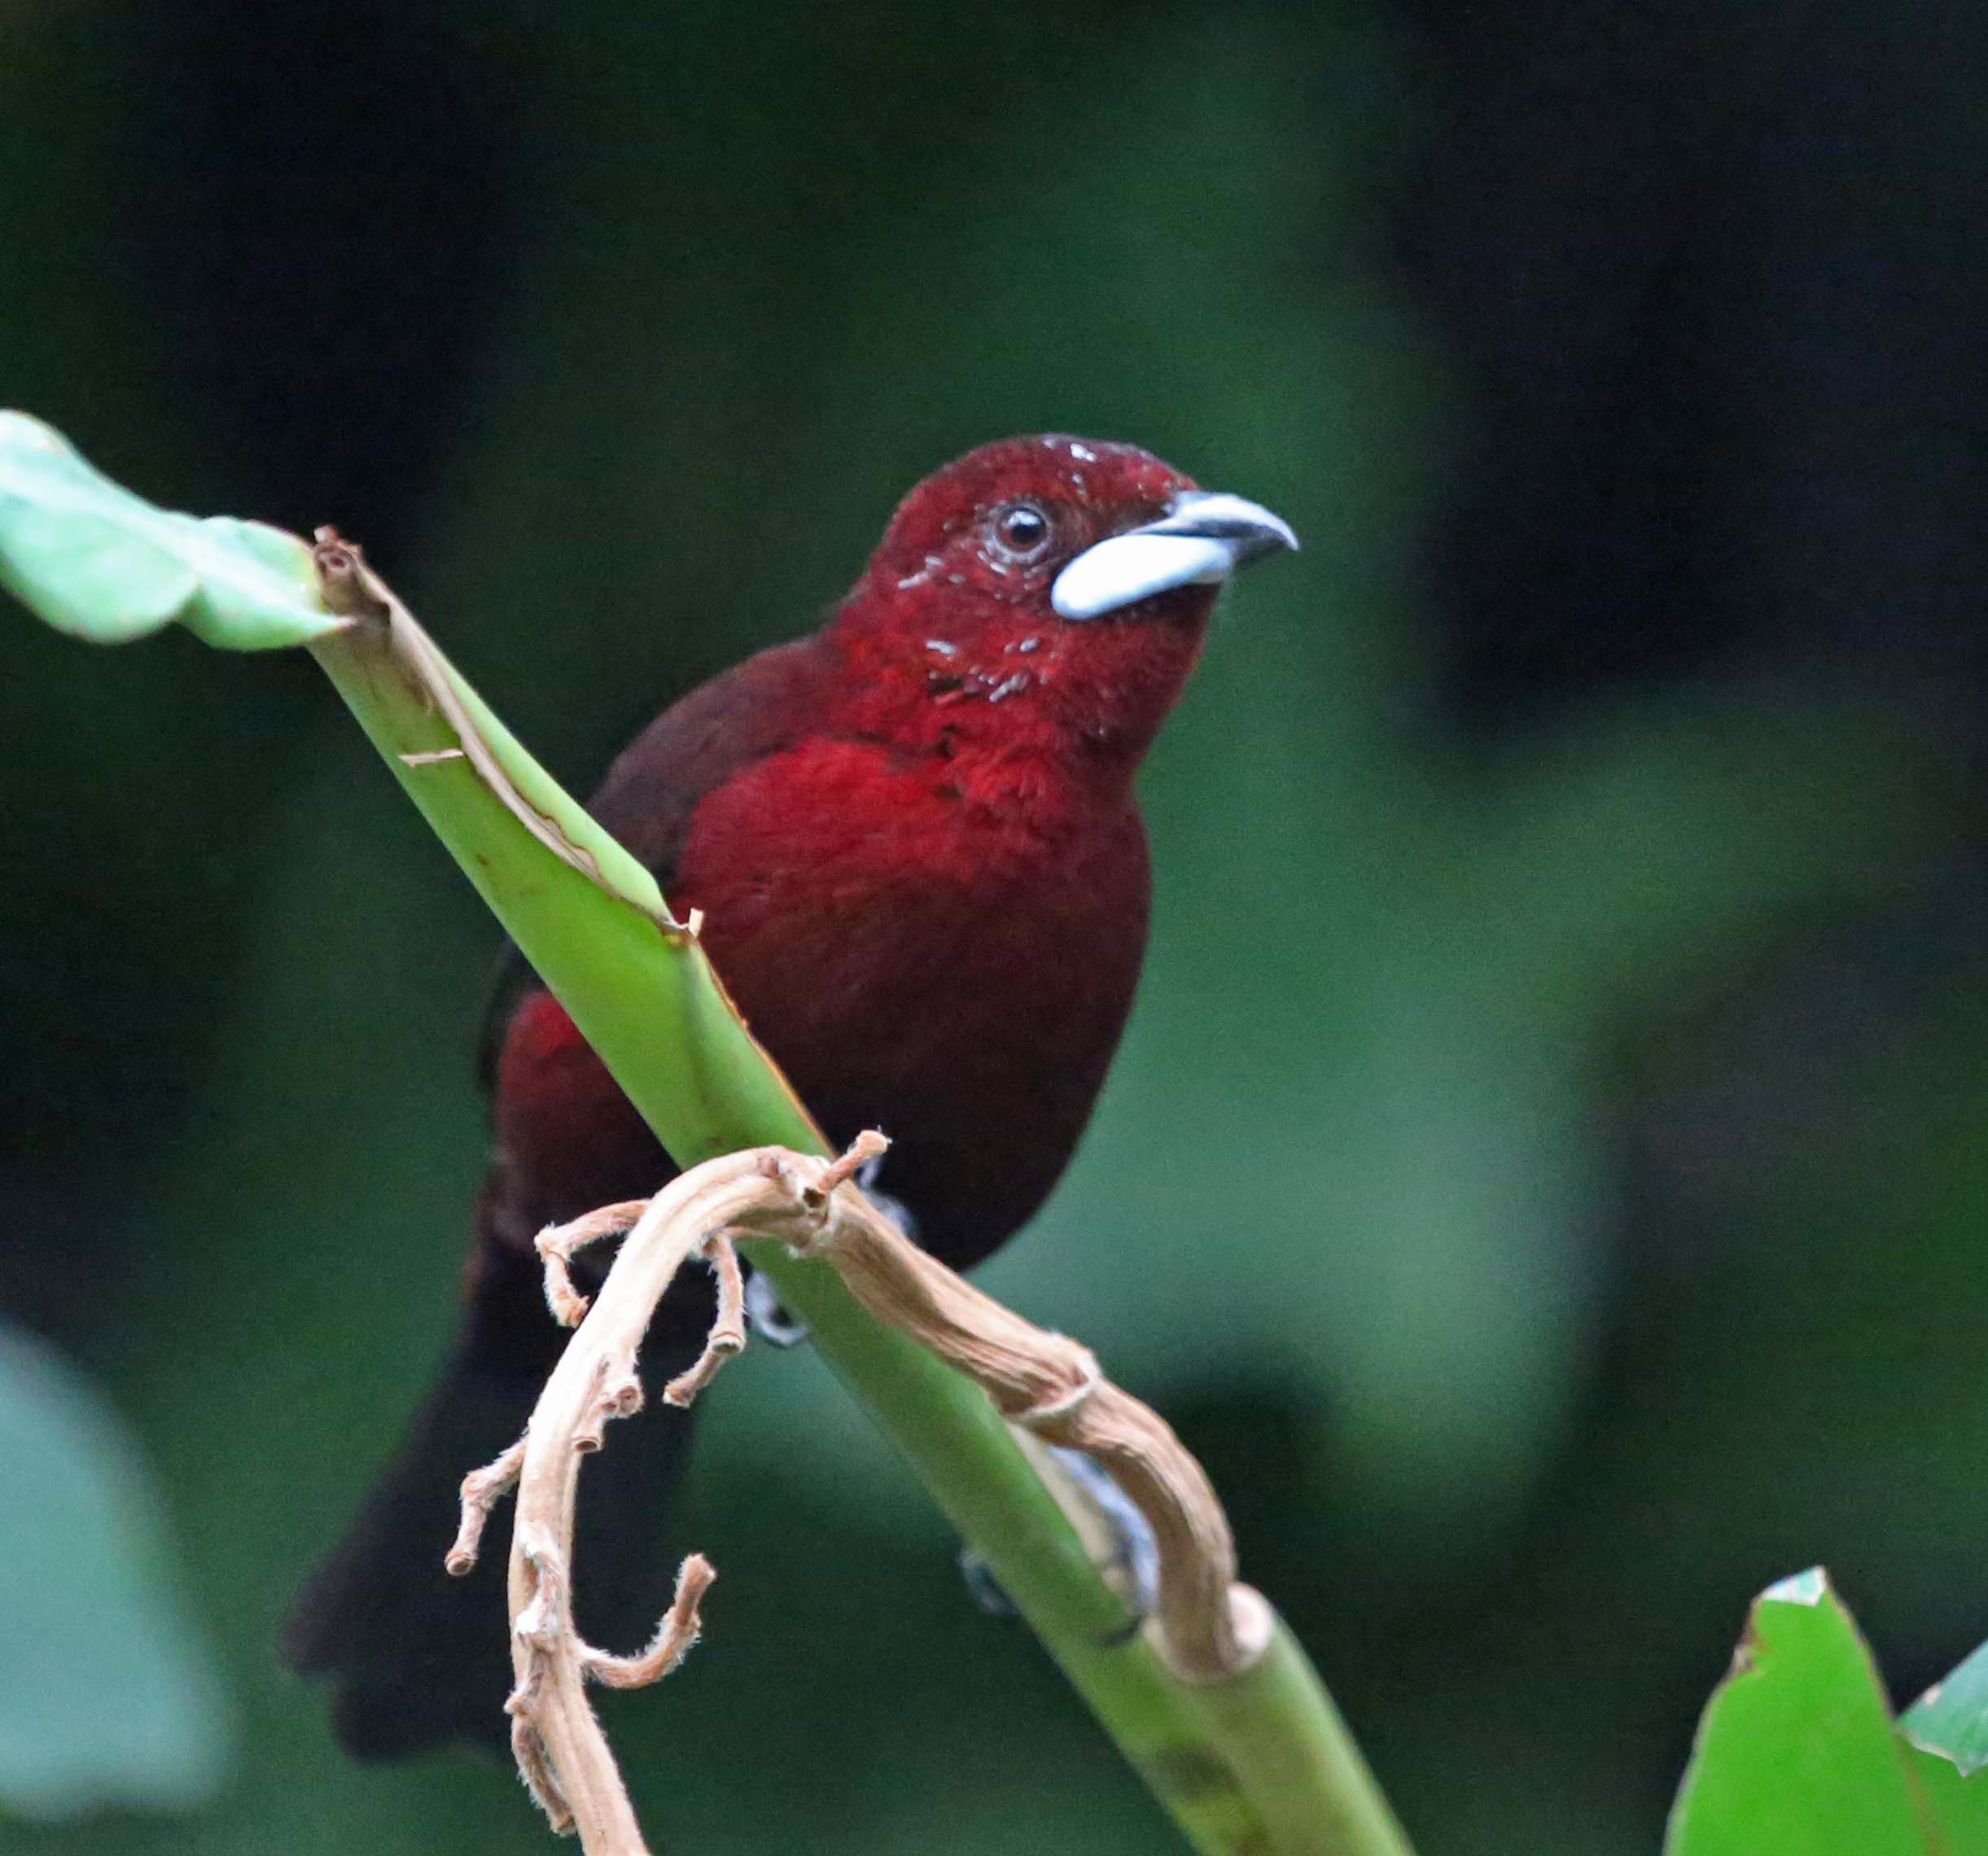 Image of Silver-beaked Tanager